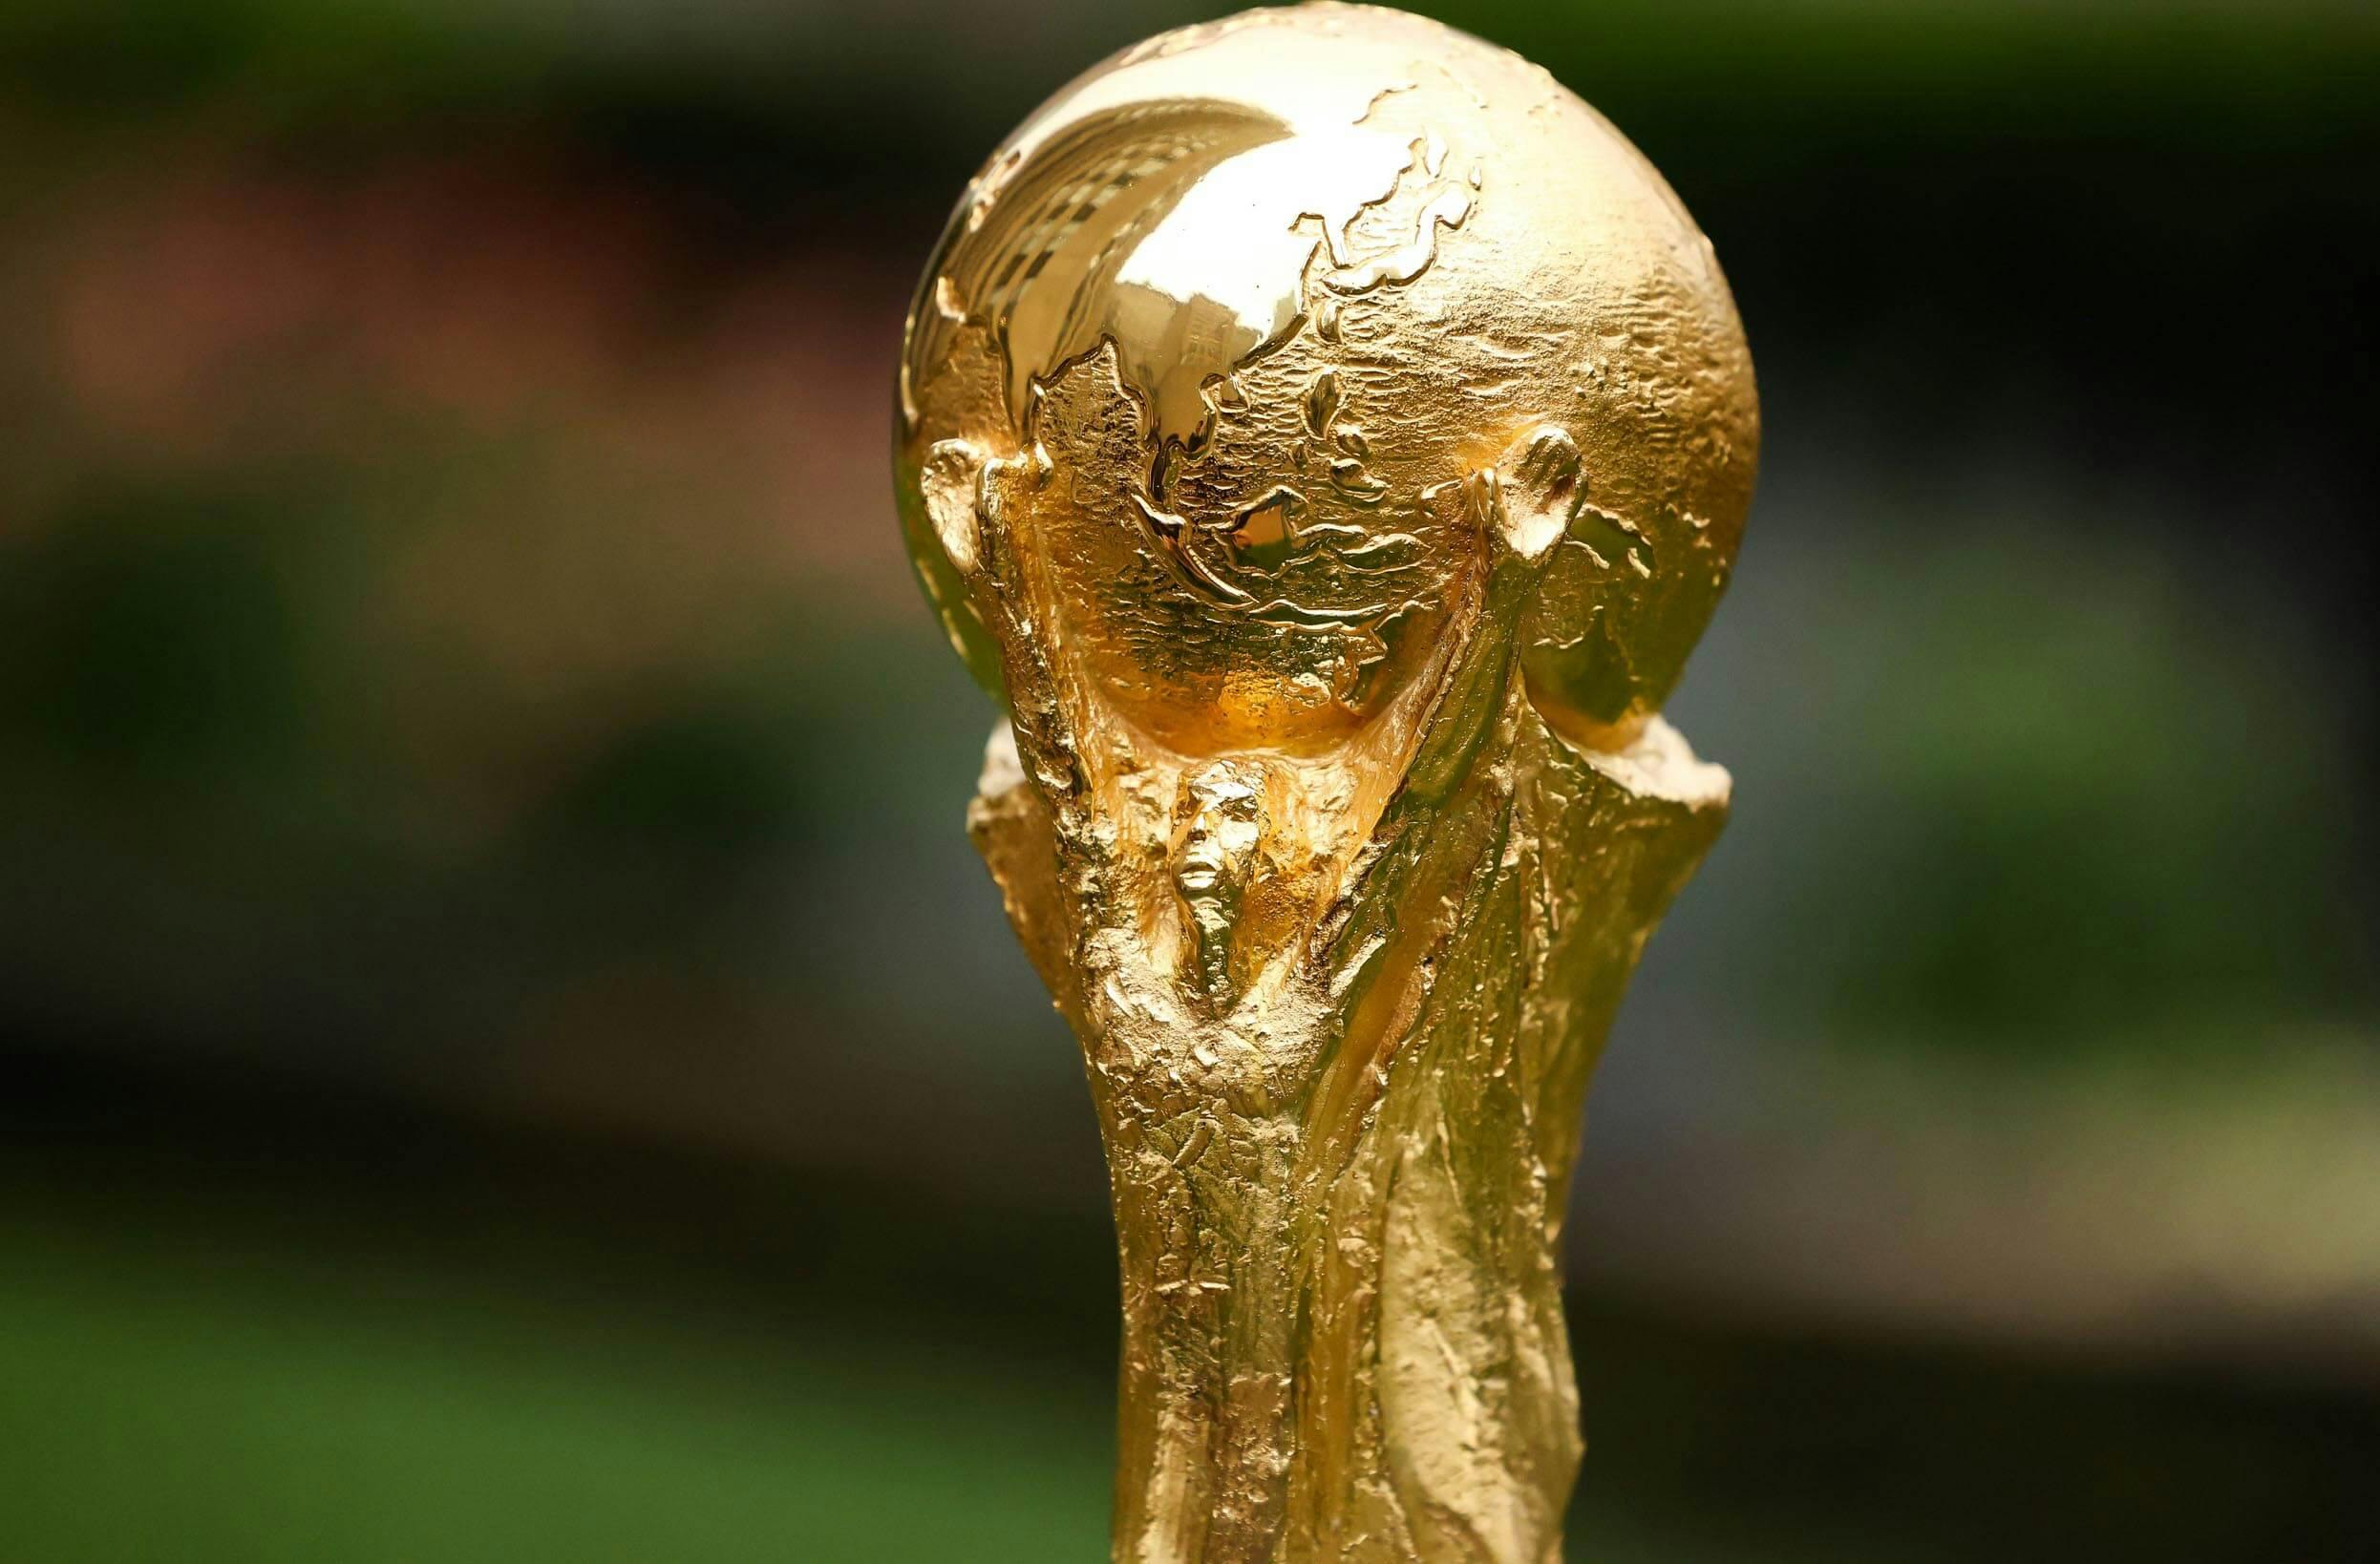 FIFA World Cup soccer trophy